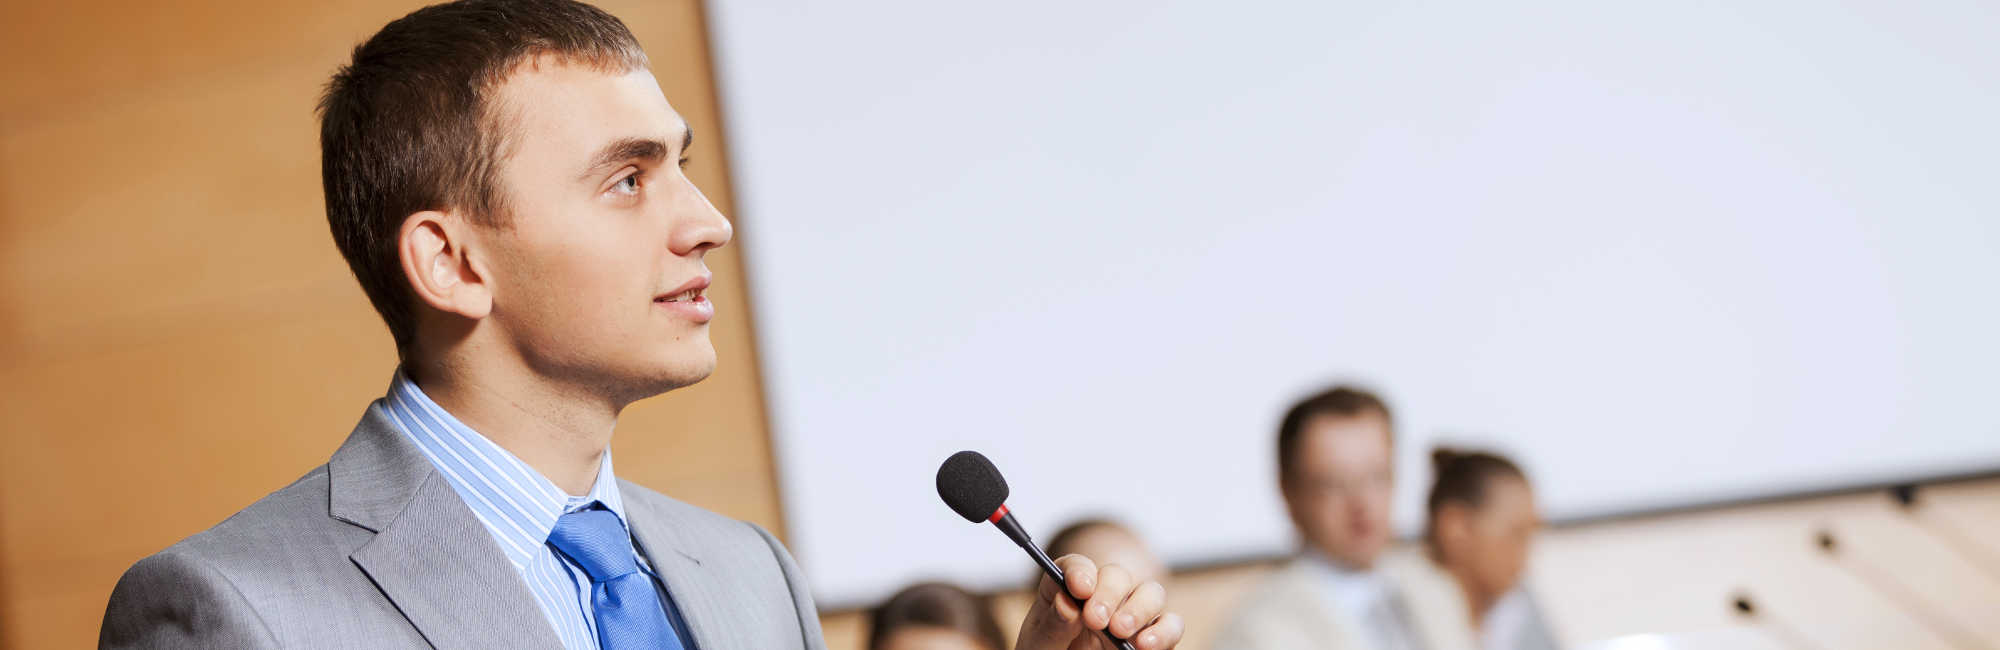 Businessman Public Speaking with Microphone